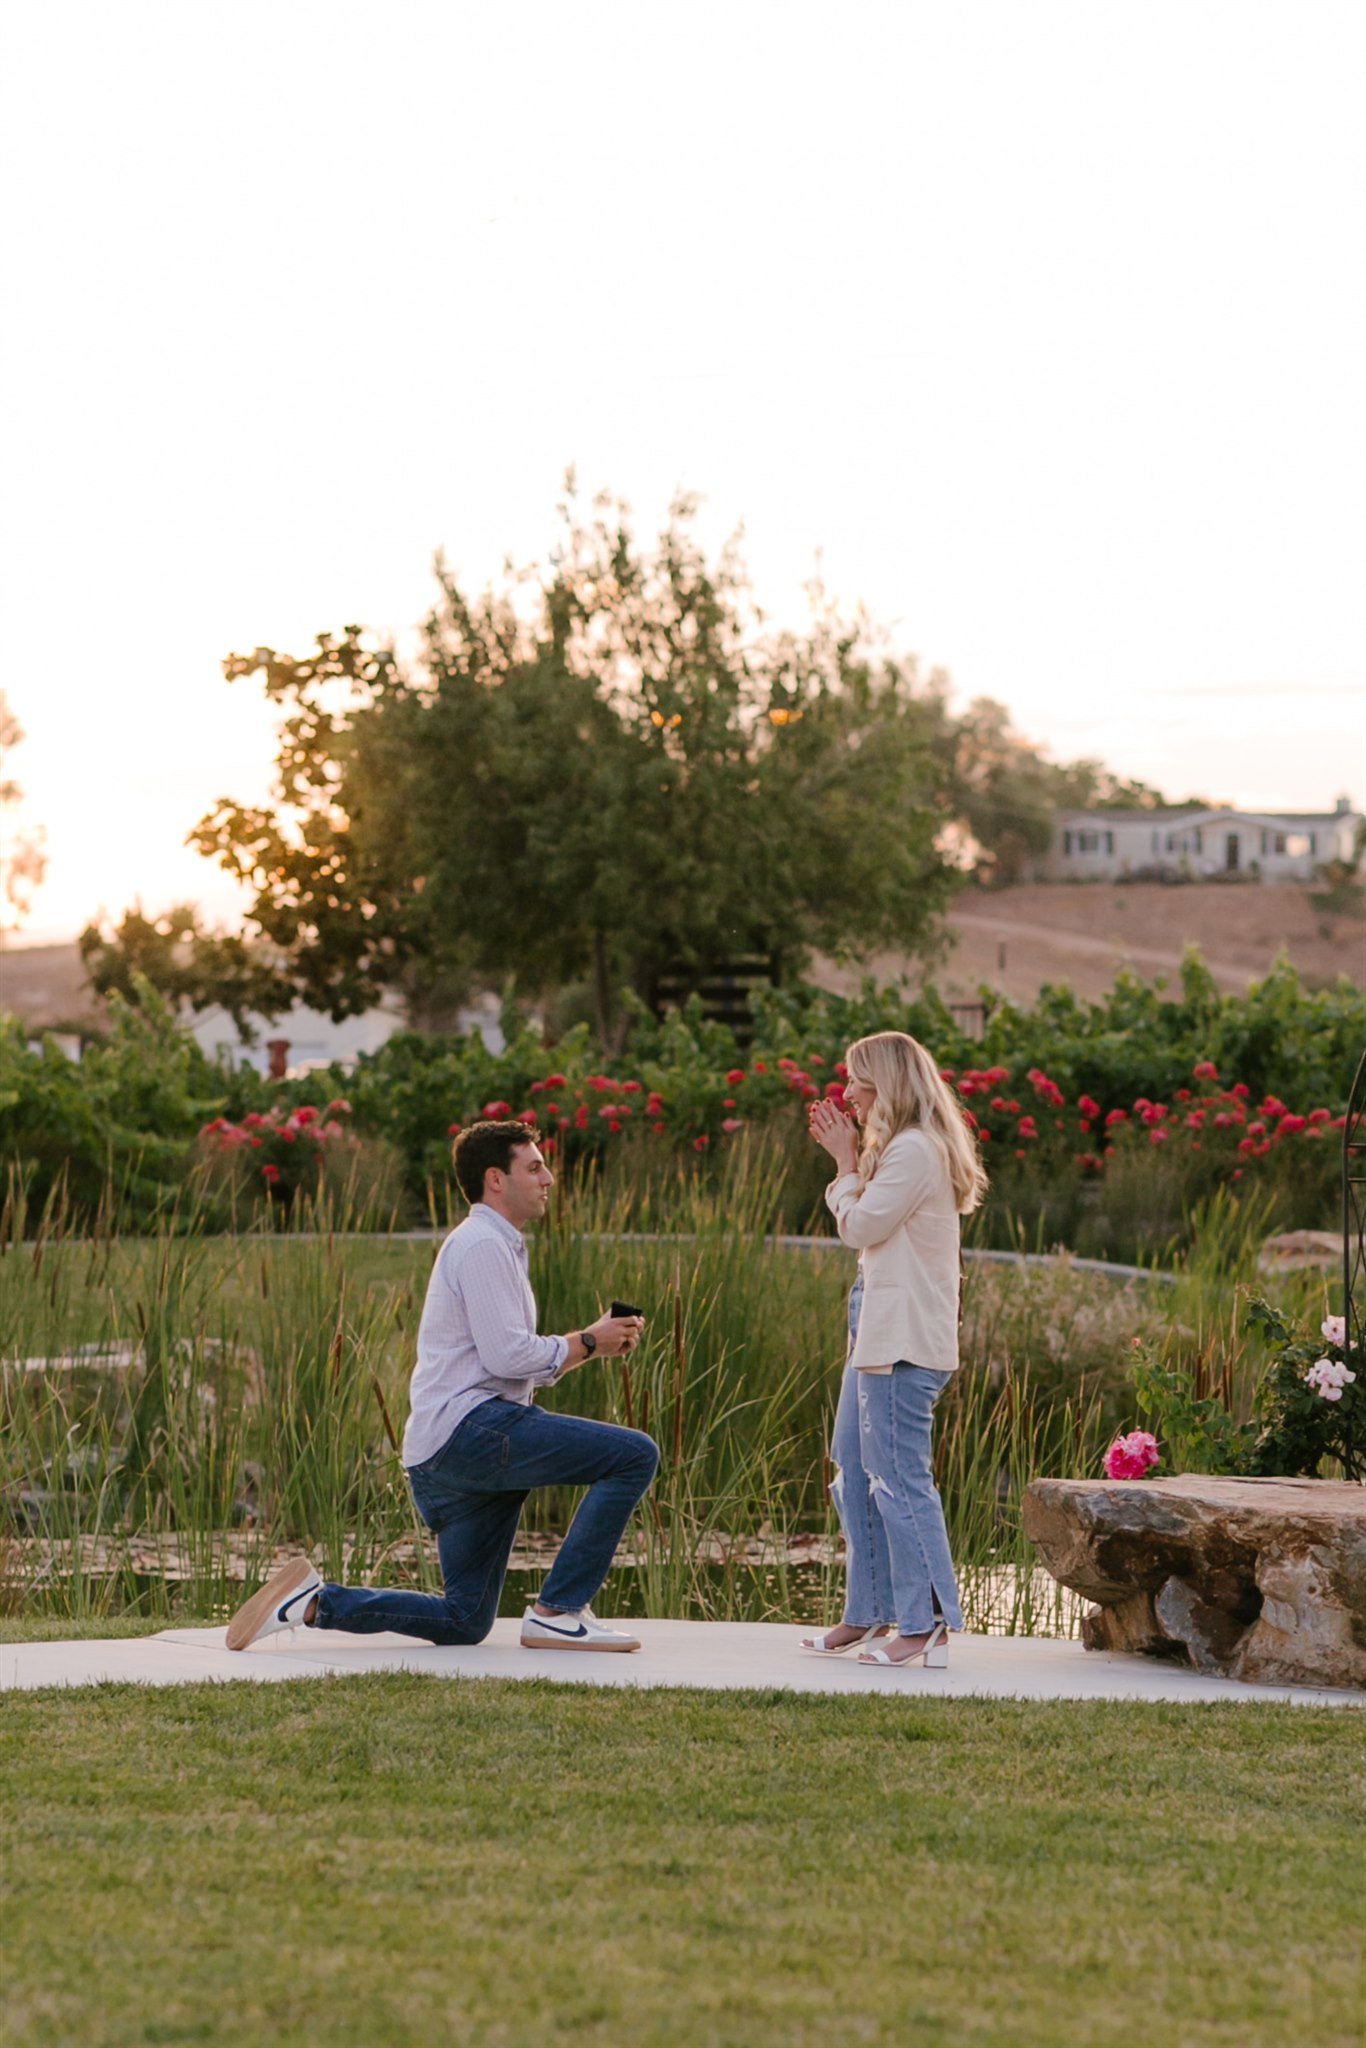 surprise proposal at temecula winery with sunset